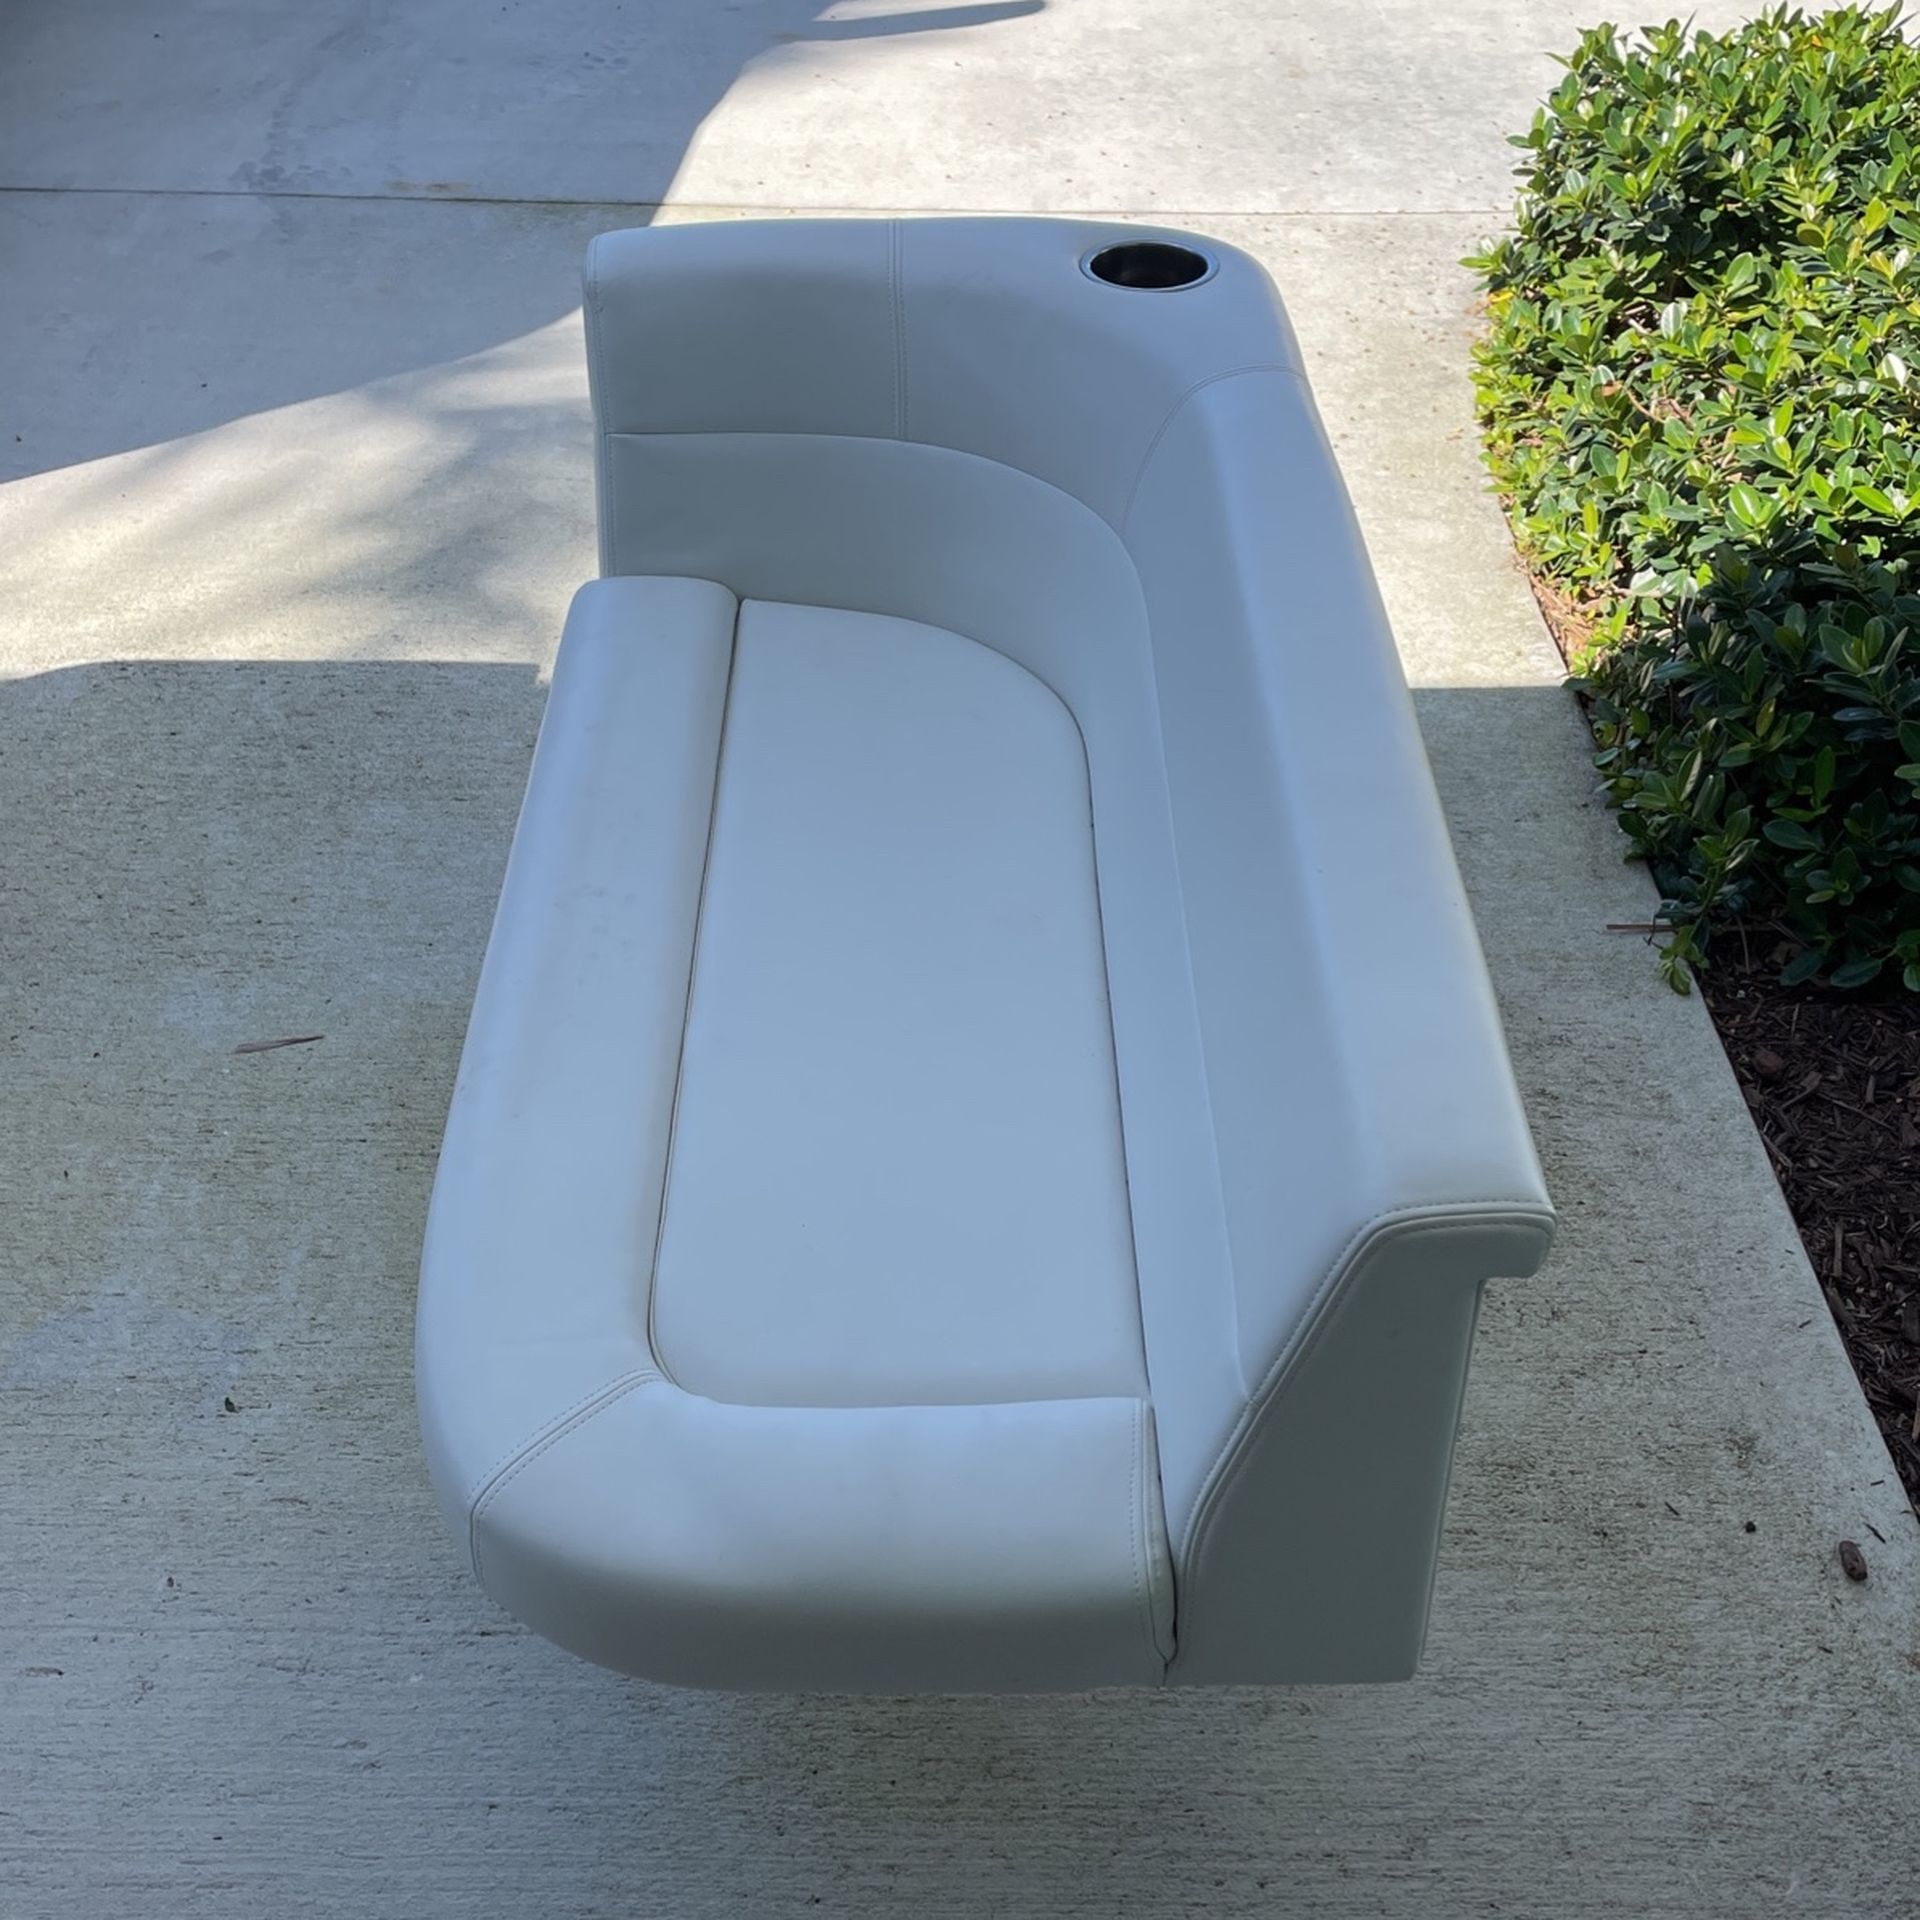 Rear Jump Seats for a Center Console Boat